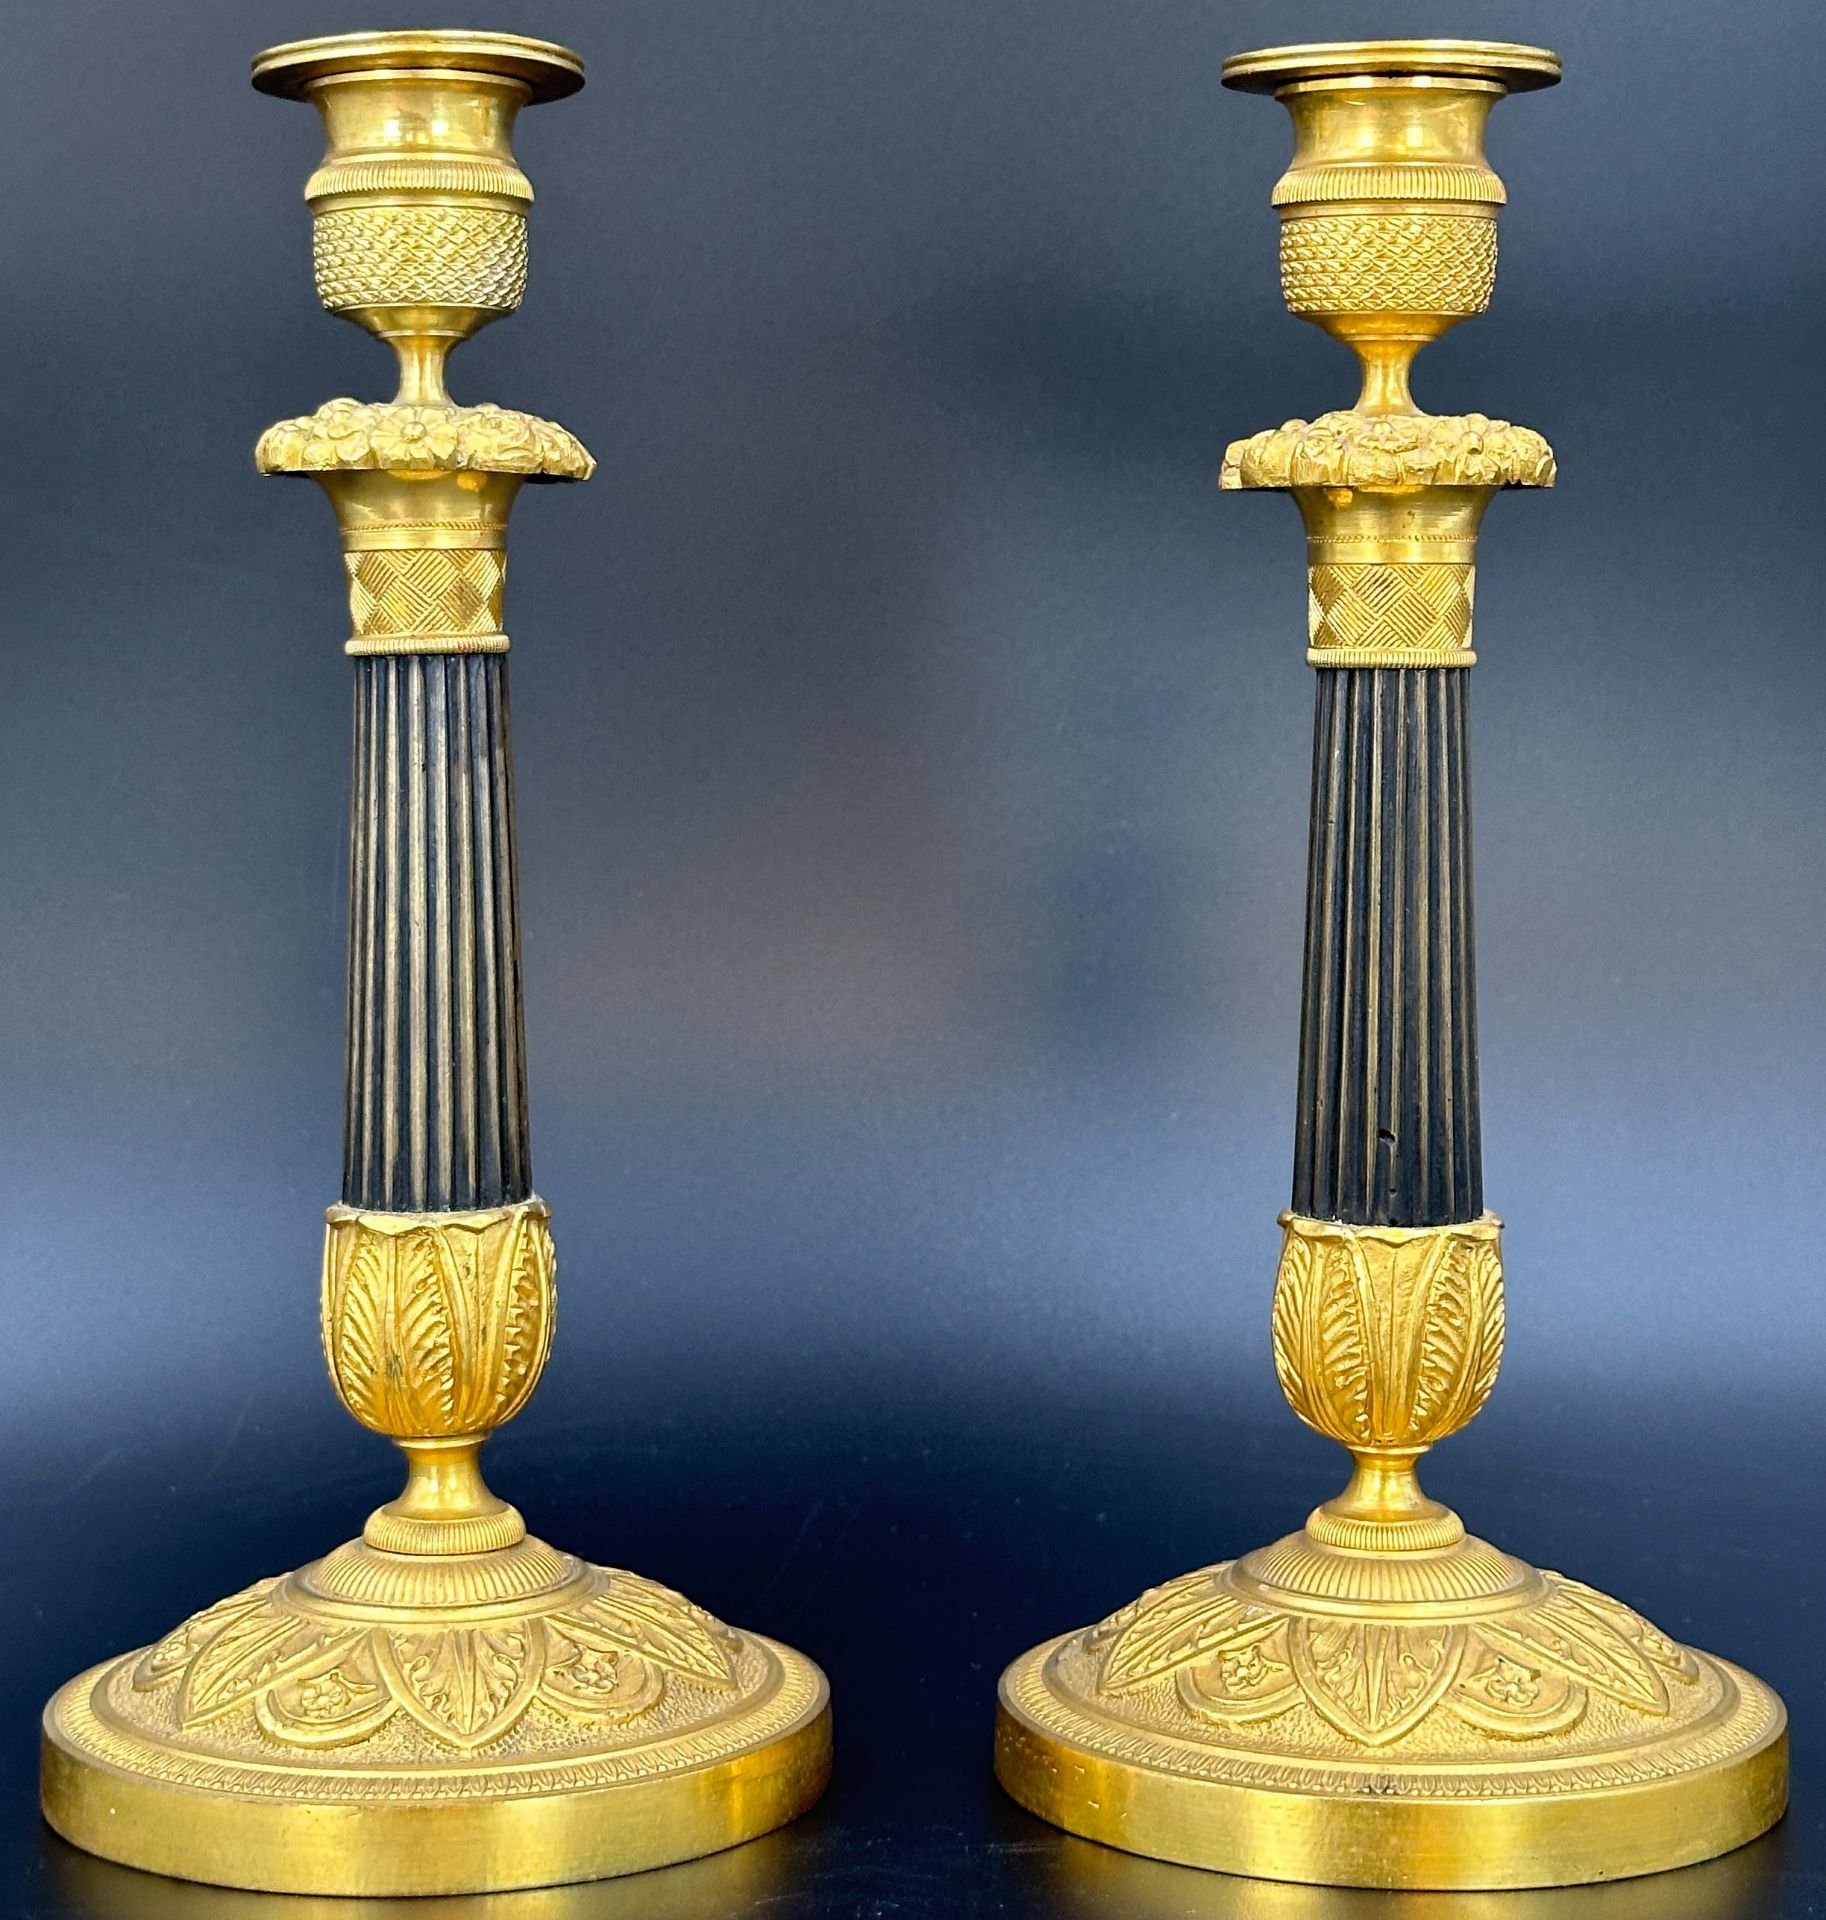 A pair of richly decorated Empire candlesticks. France. 19th century.